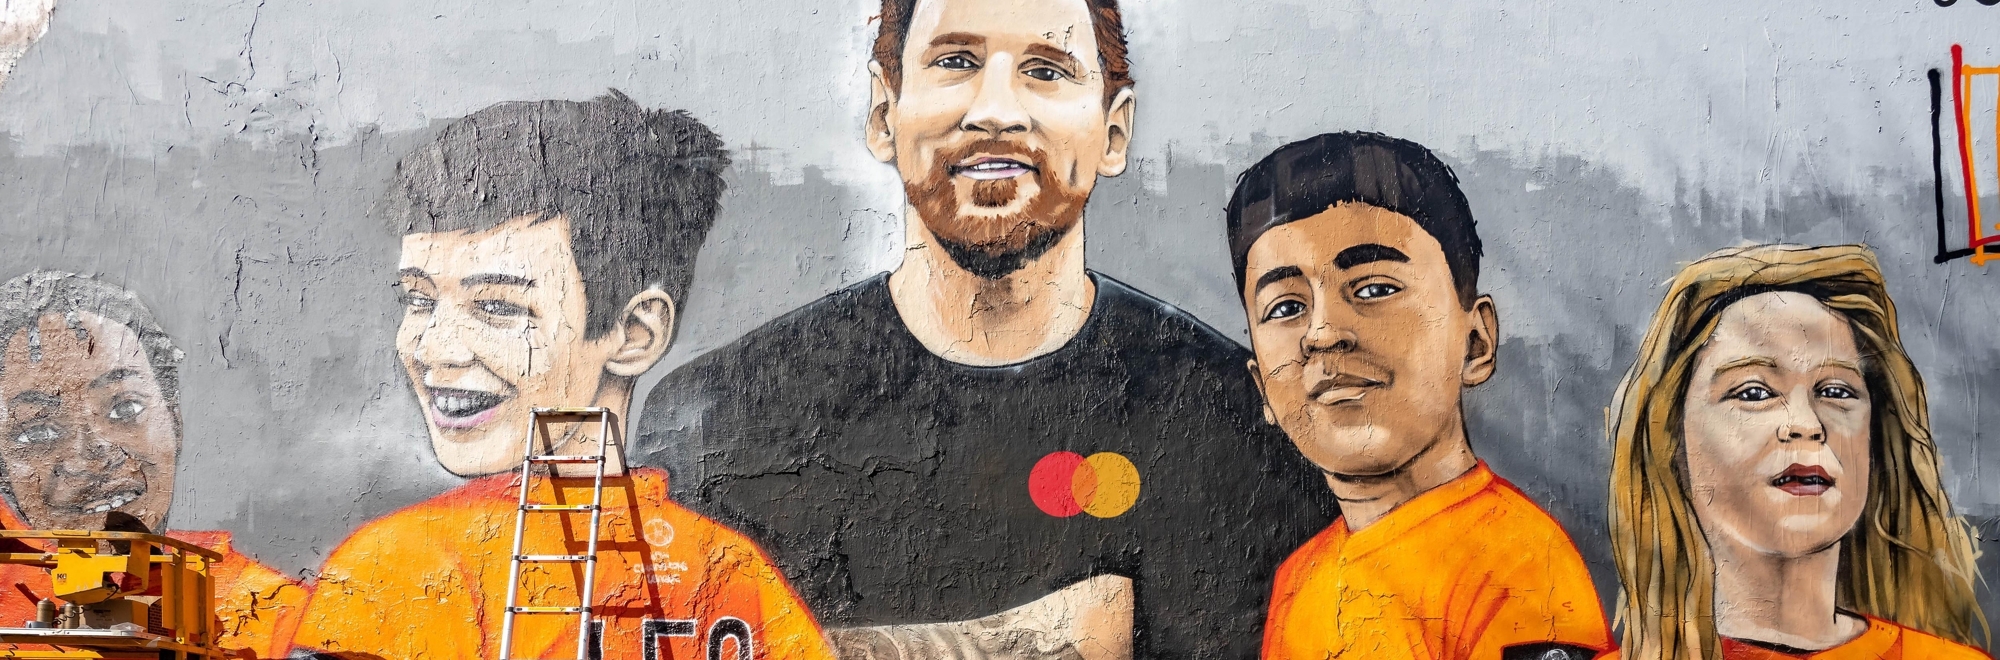 Messi highlights young football fans in new Mastercard campaign